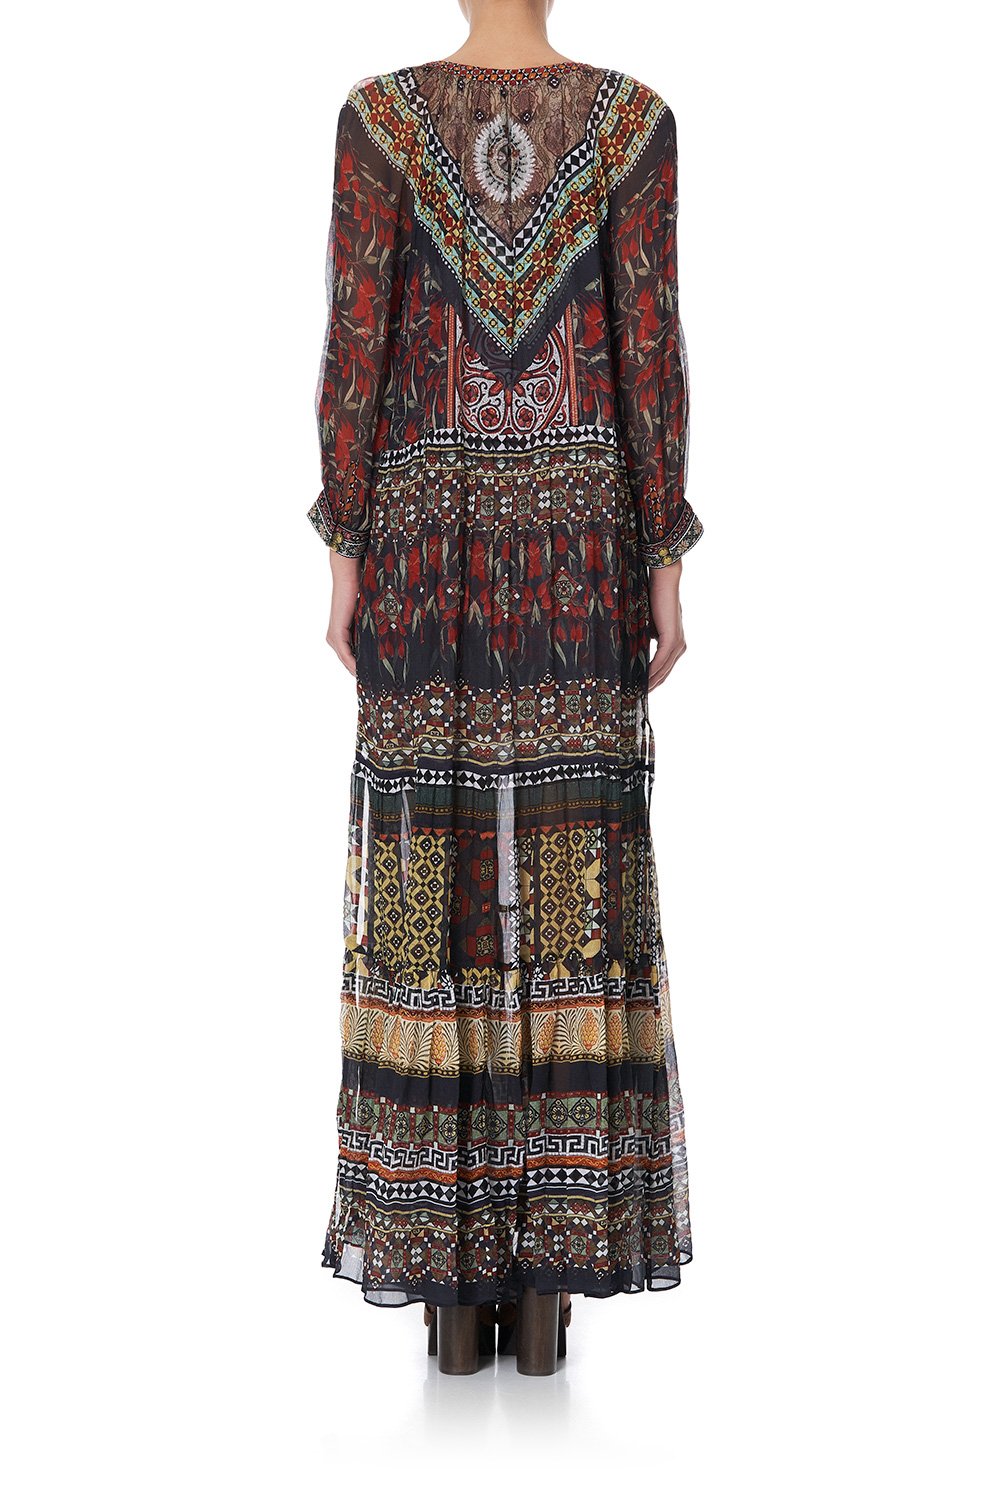 LONG GATHERED PANEL DRESS PAVED IN PAISLEY